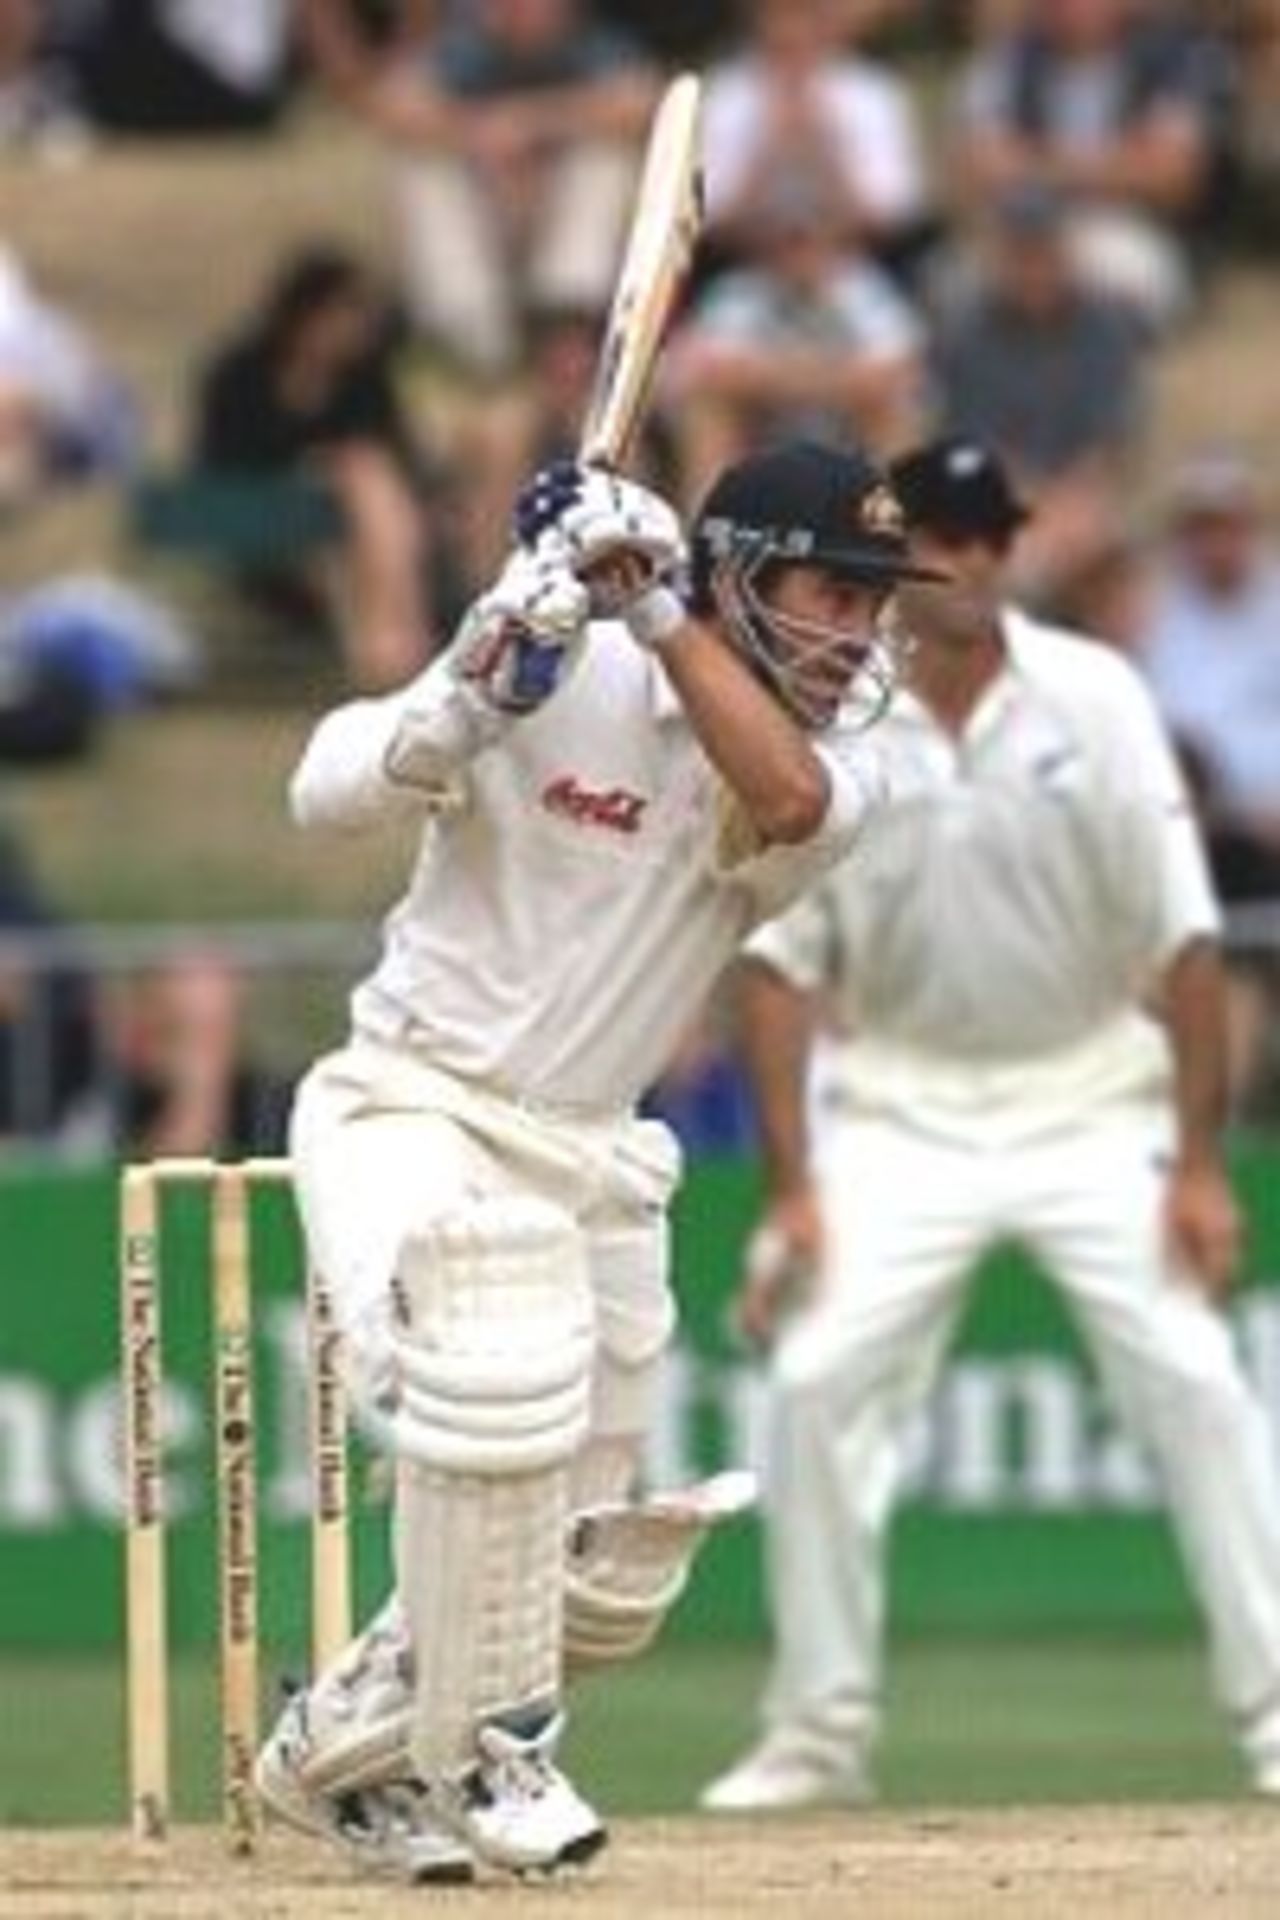 02 Apr 2000: Justin Langer of Australia drives on his way to a half century off only 42 deliveries, an Australian record, during day three of the third test between New Zealand and Australia, at WestpacTrust Park, Hamilton, New Zealand.